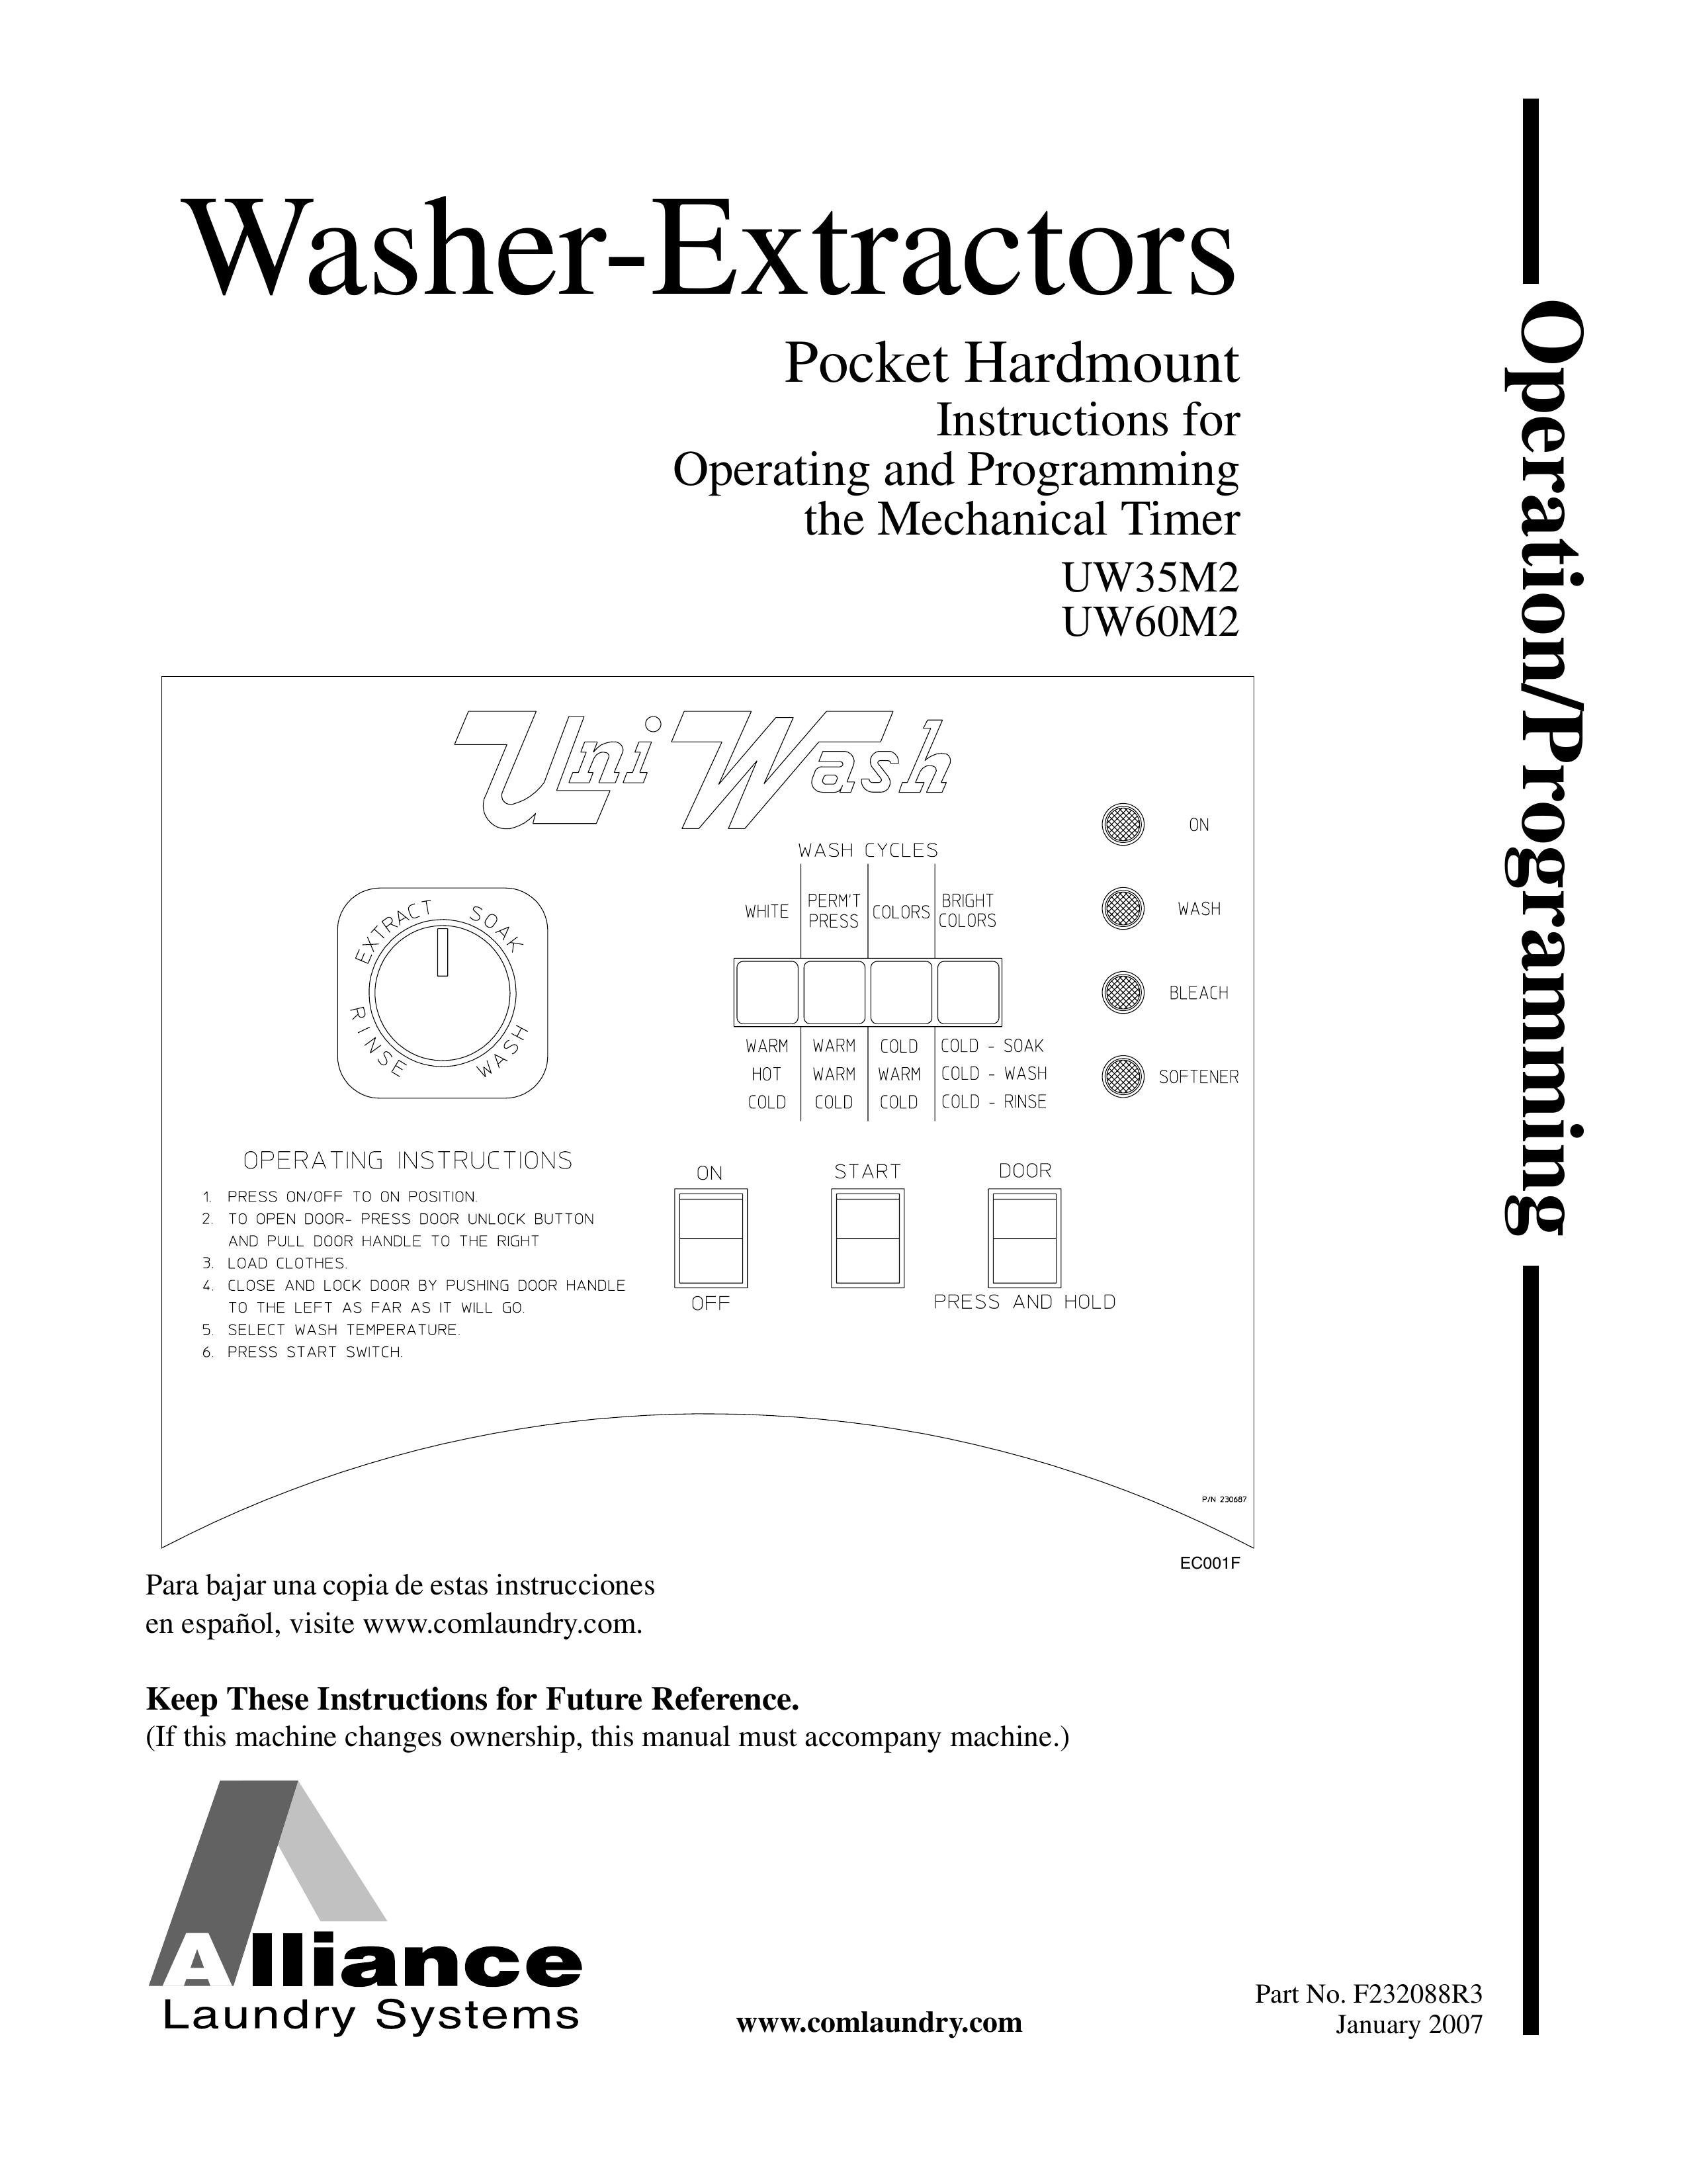 Alliance Laundry Systems EC001F Washer User Manual